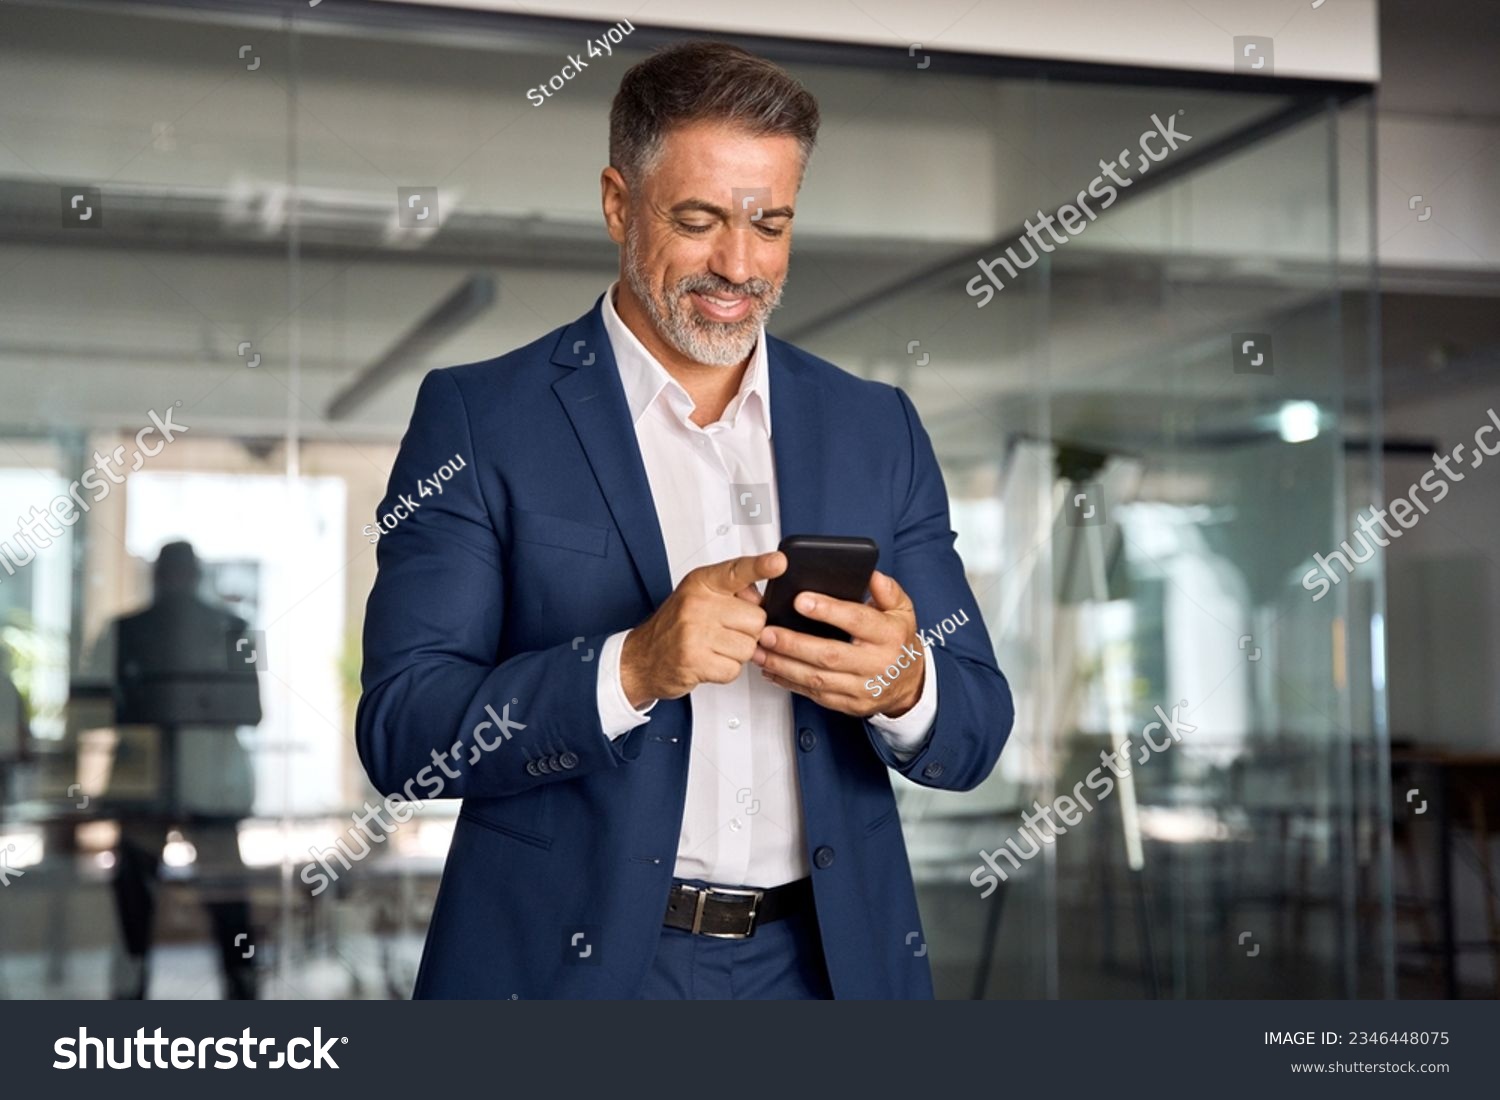 Smiling mature Latin or Indian businessman holding smartphone in office. Middle aged manager using cell phone mobile app. Digital technology application and solutions for business success development. #2346448075